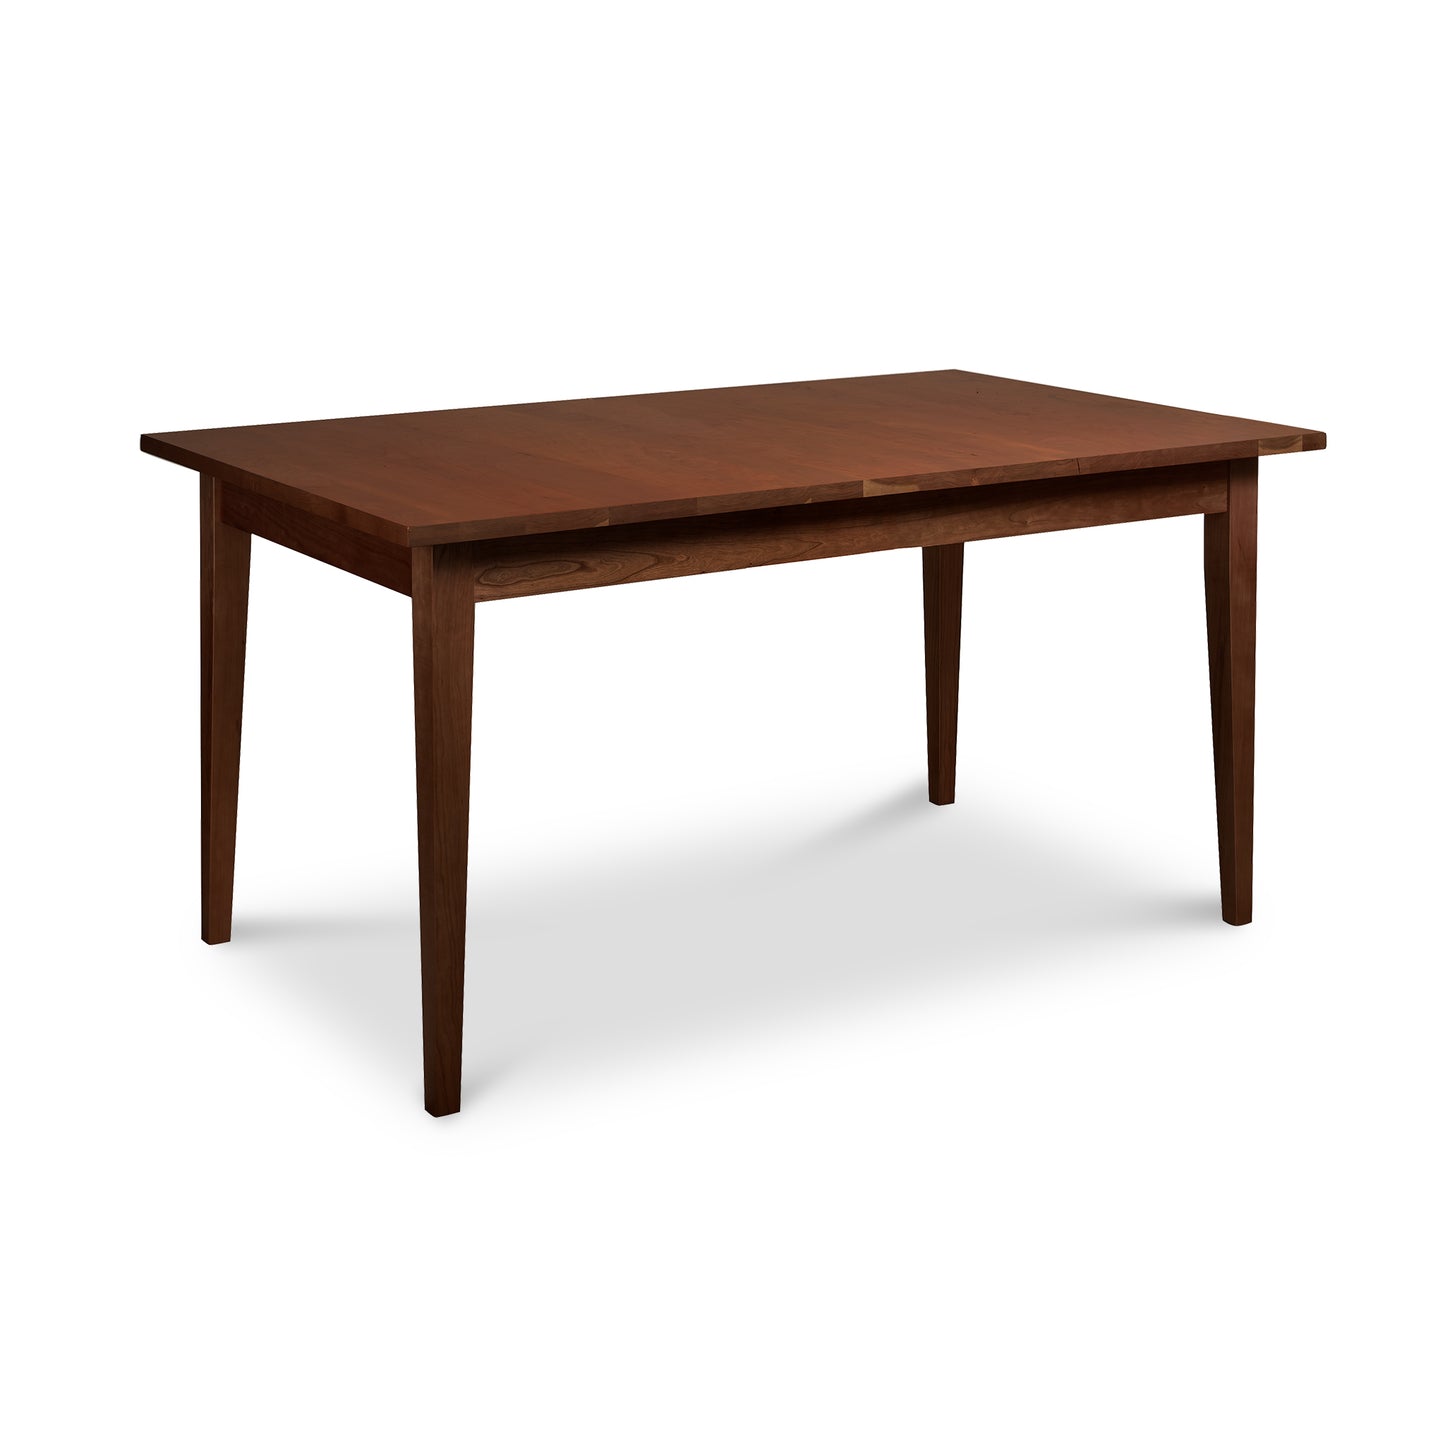 A high-quality Classic Shaker Solid Top Dining Table with a wooden top and legs by Lyndon Furniture.